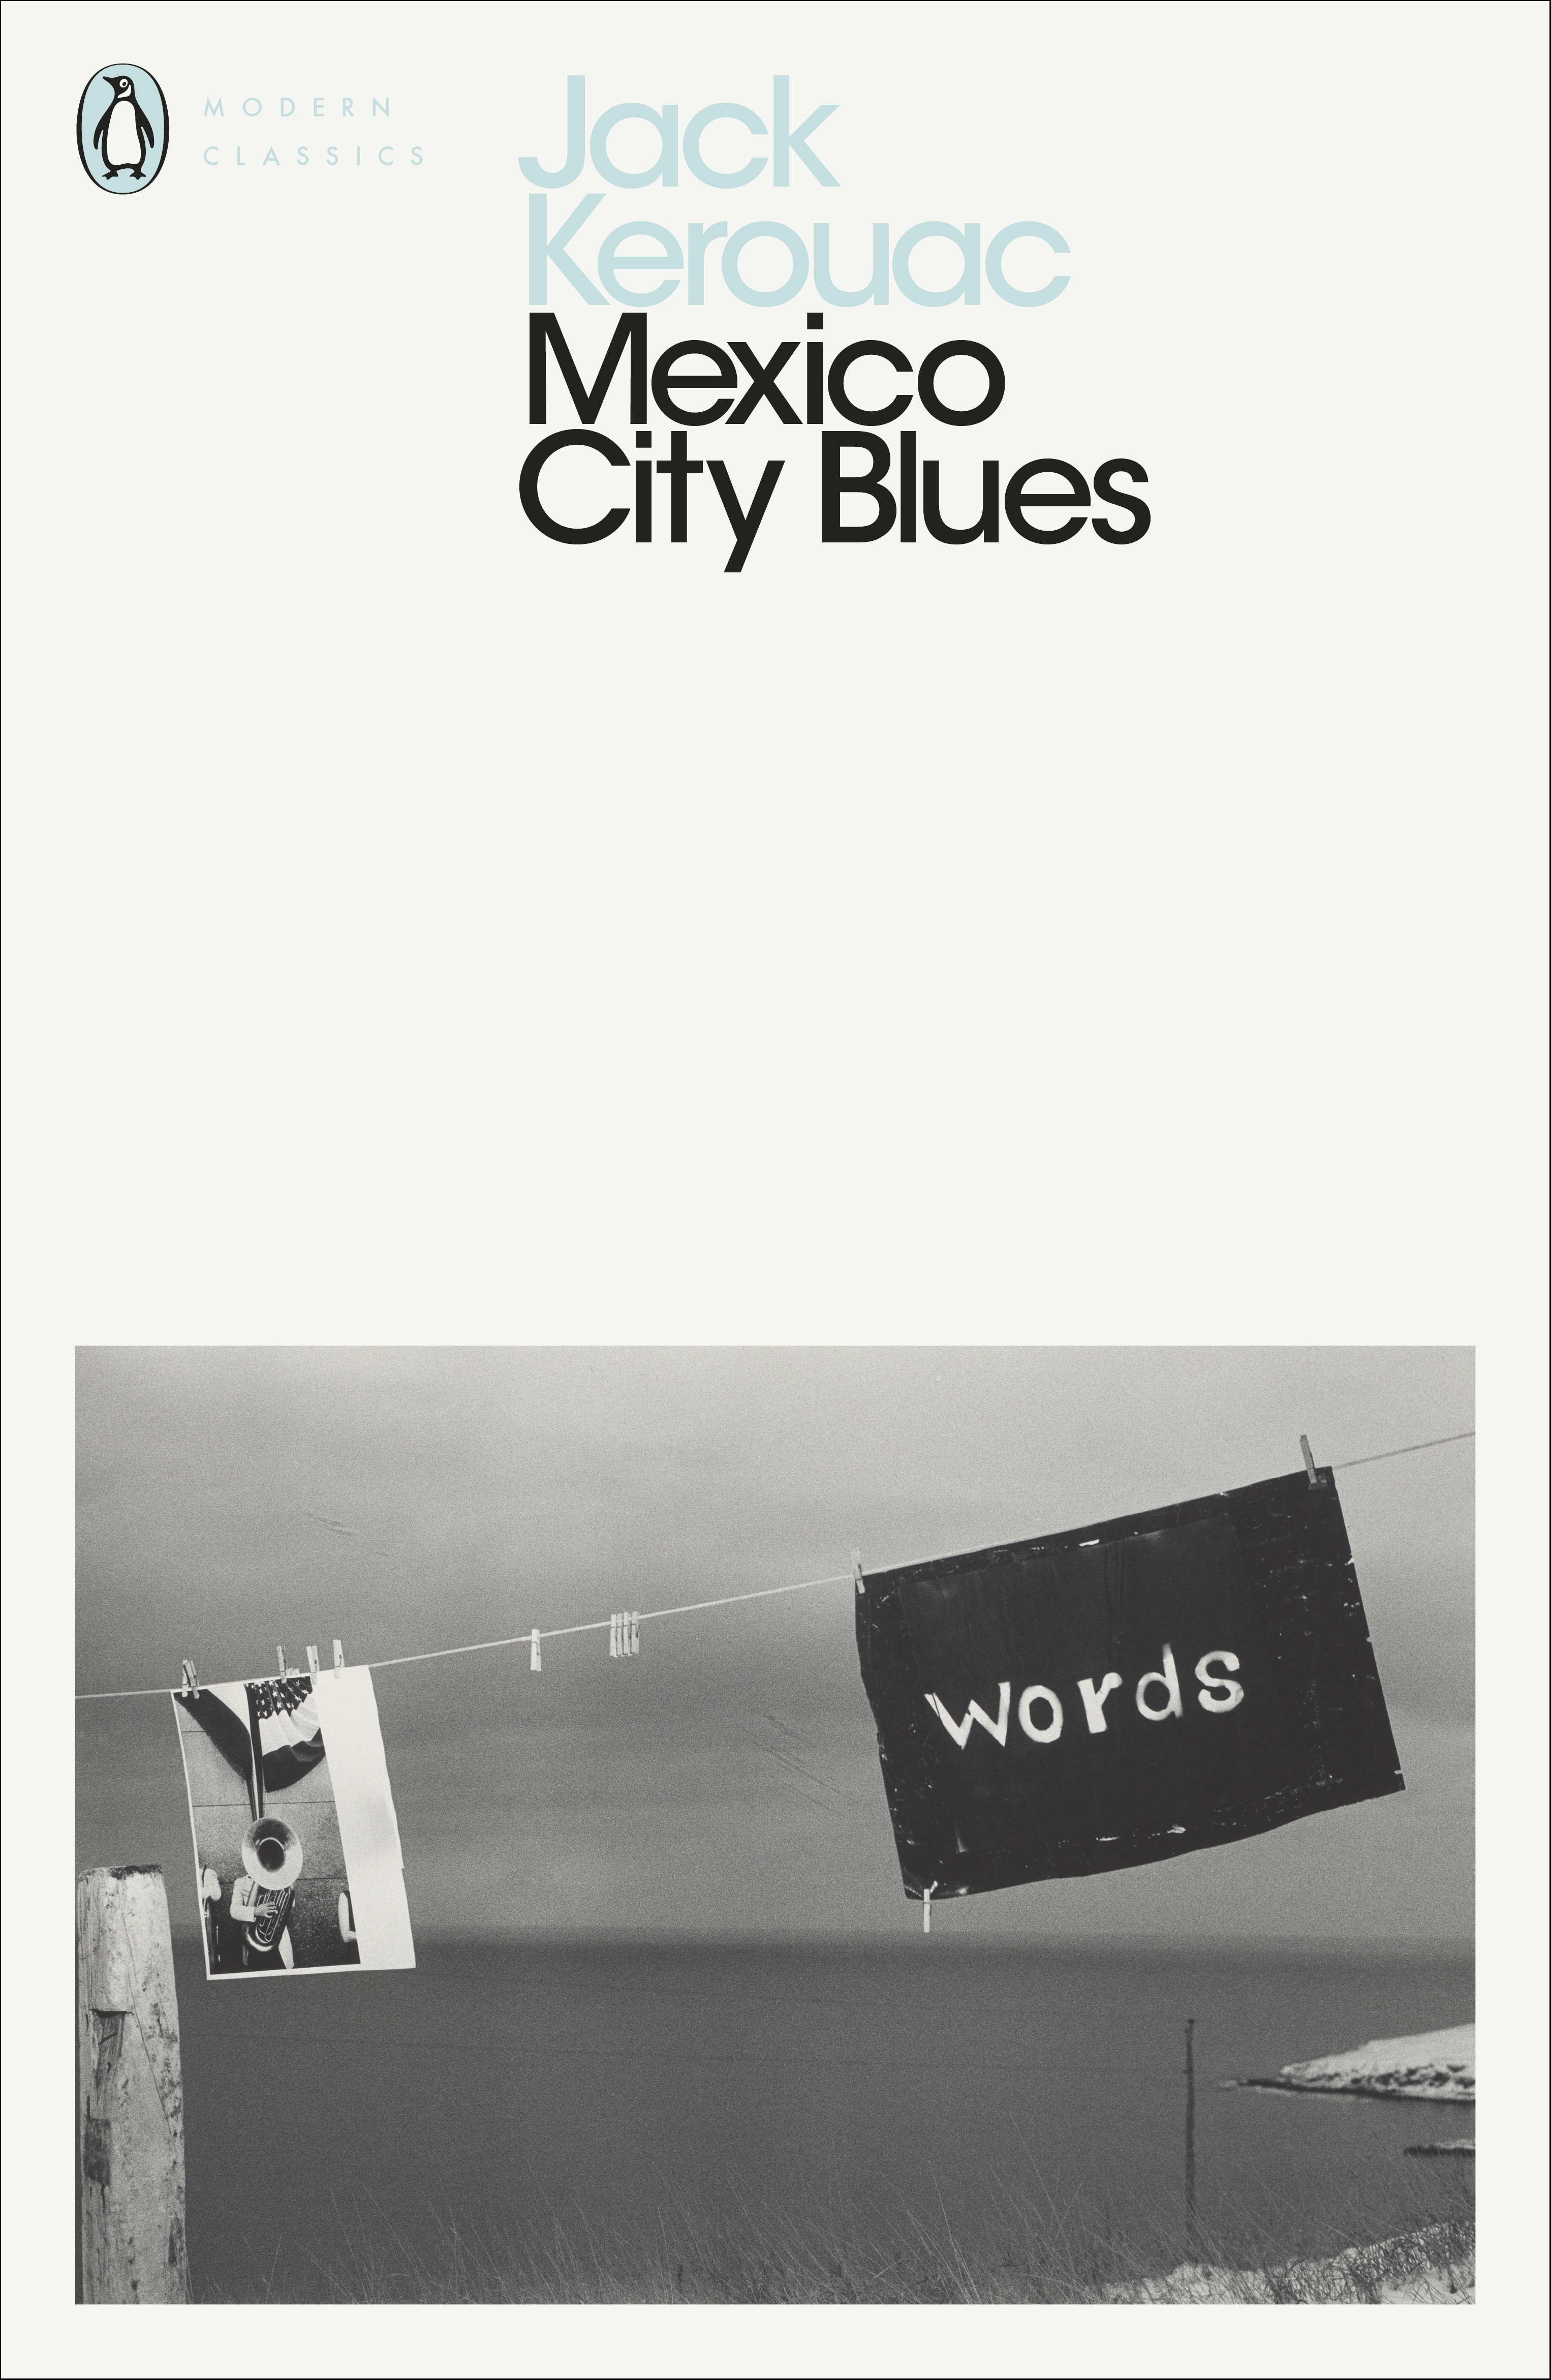 Book “Mexico City Blues” by Jack Kerouac — July 4, 2019